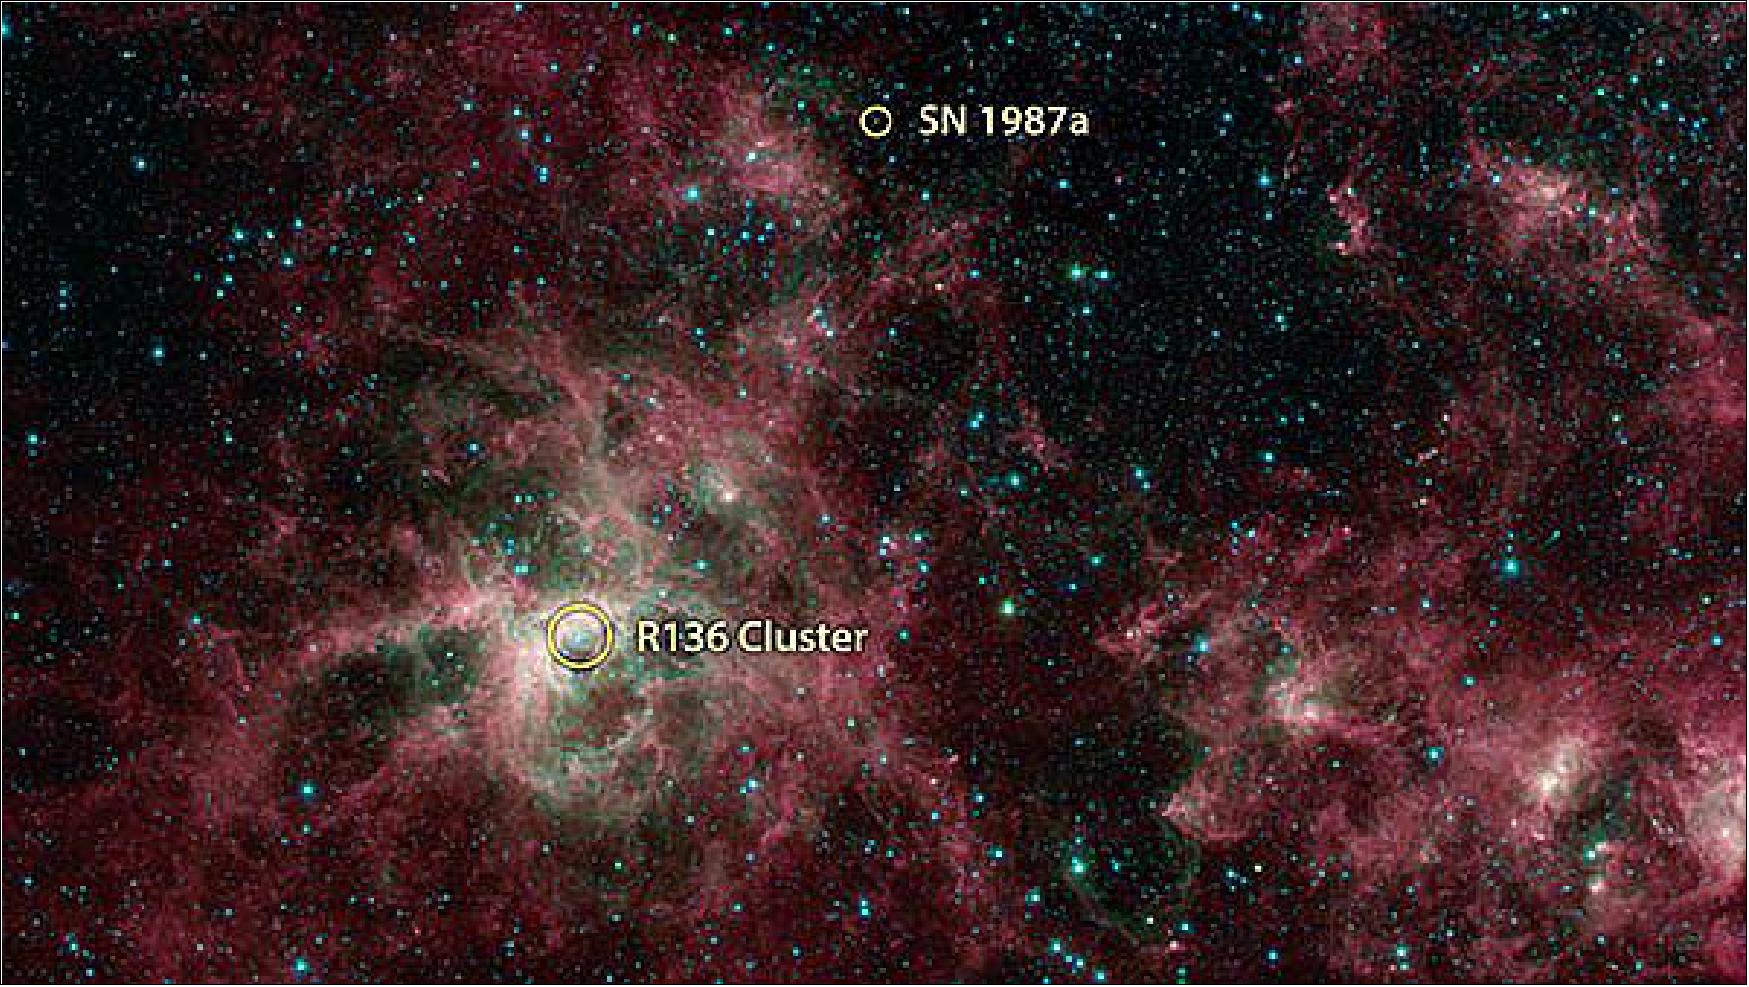 Figure 37: This annotated image from NASA's Spitzer Space Telescope shows the Tarantula Nebula in infrared light. The supernova 1987A and the starburst region R136 are noted. The magenta-colored regions are primarily interstellar dust that is similar in composition to ash from coal or wood fires on Earth (image credit: NASA/JPL-Caltech)